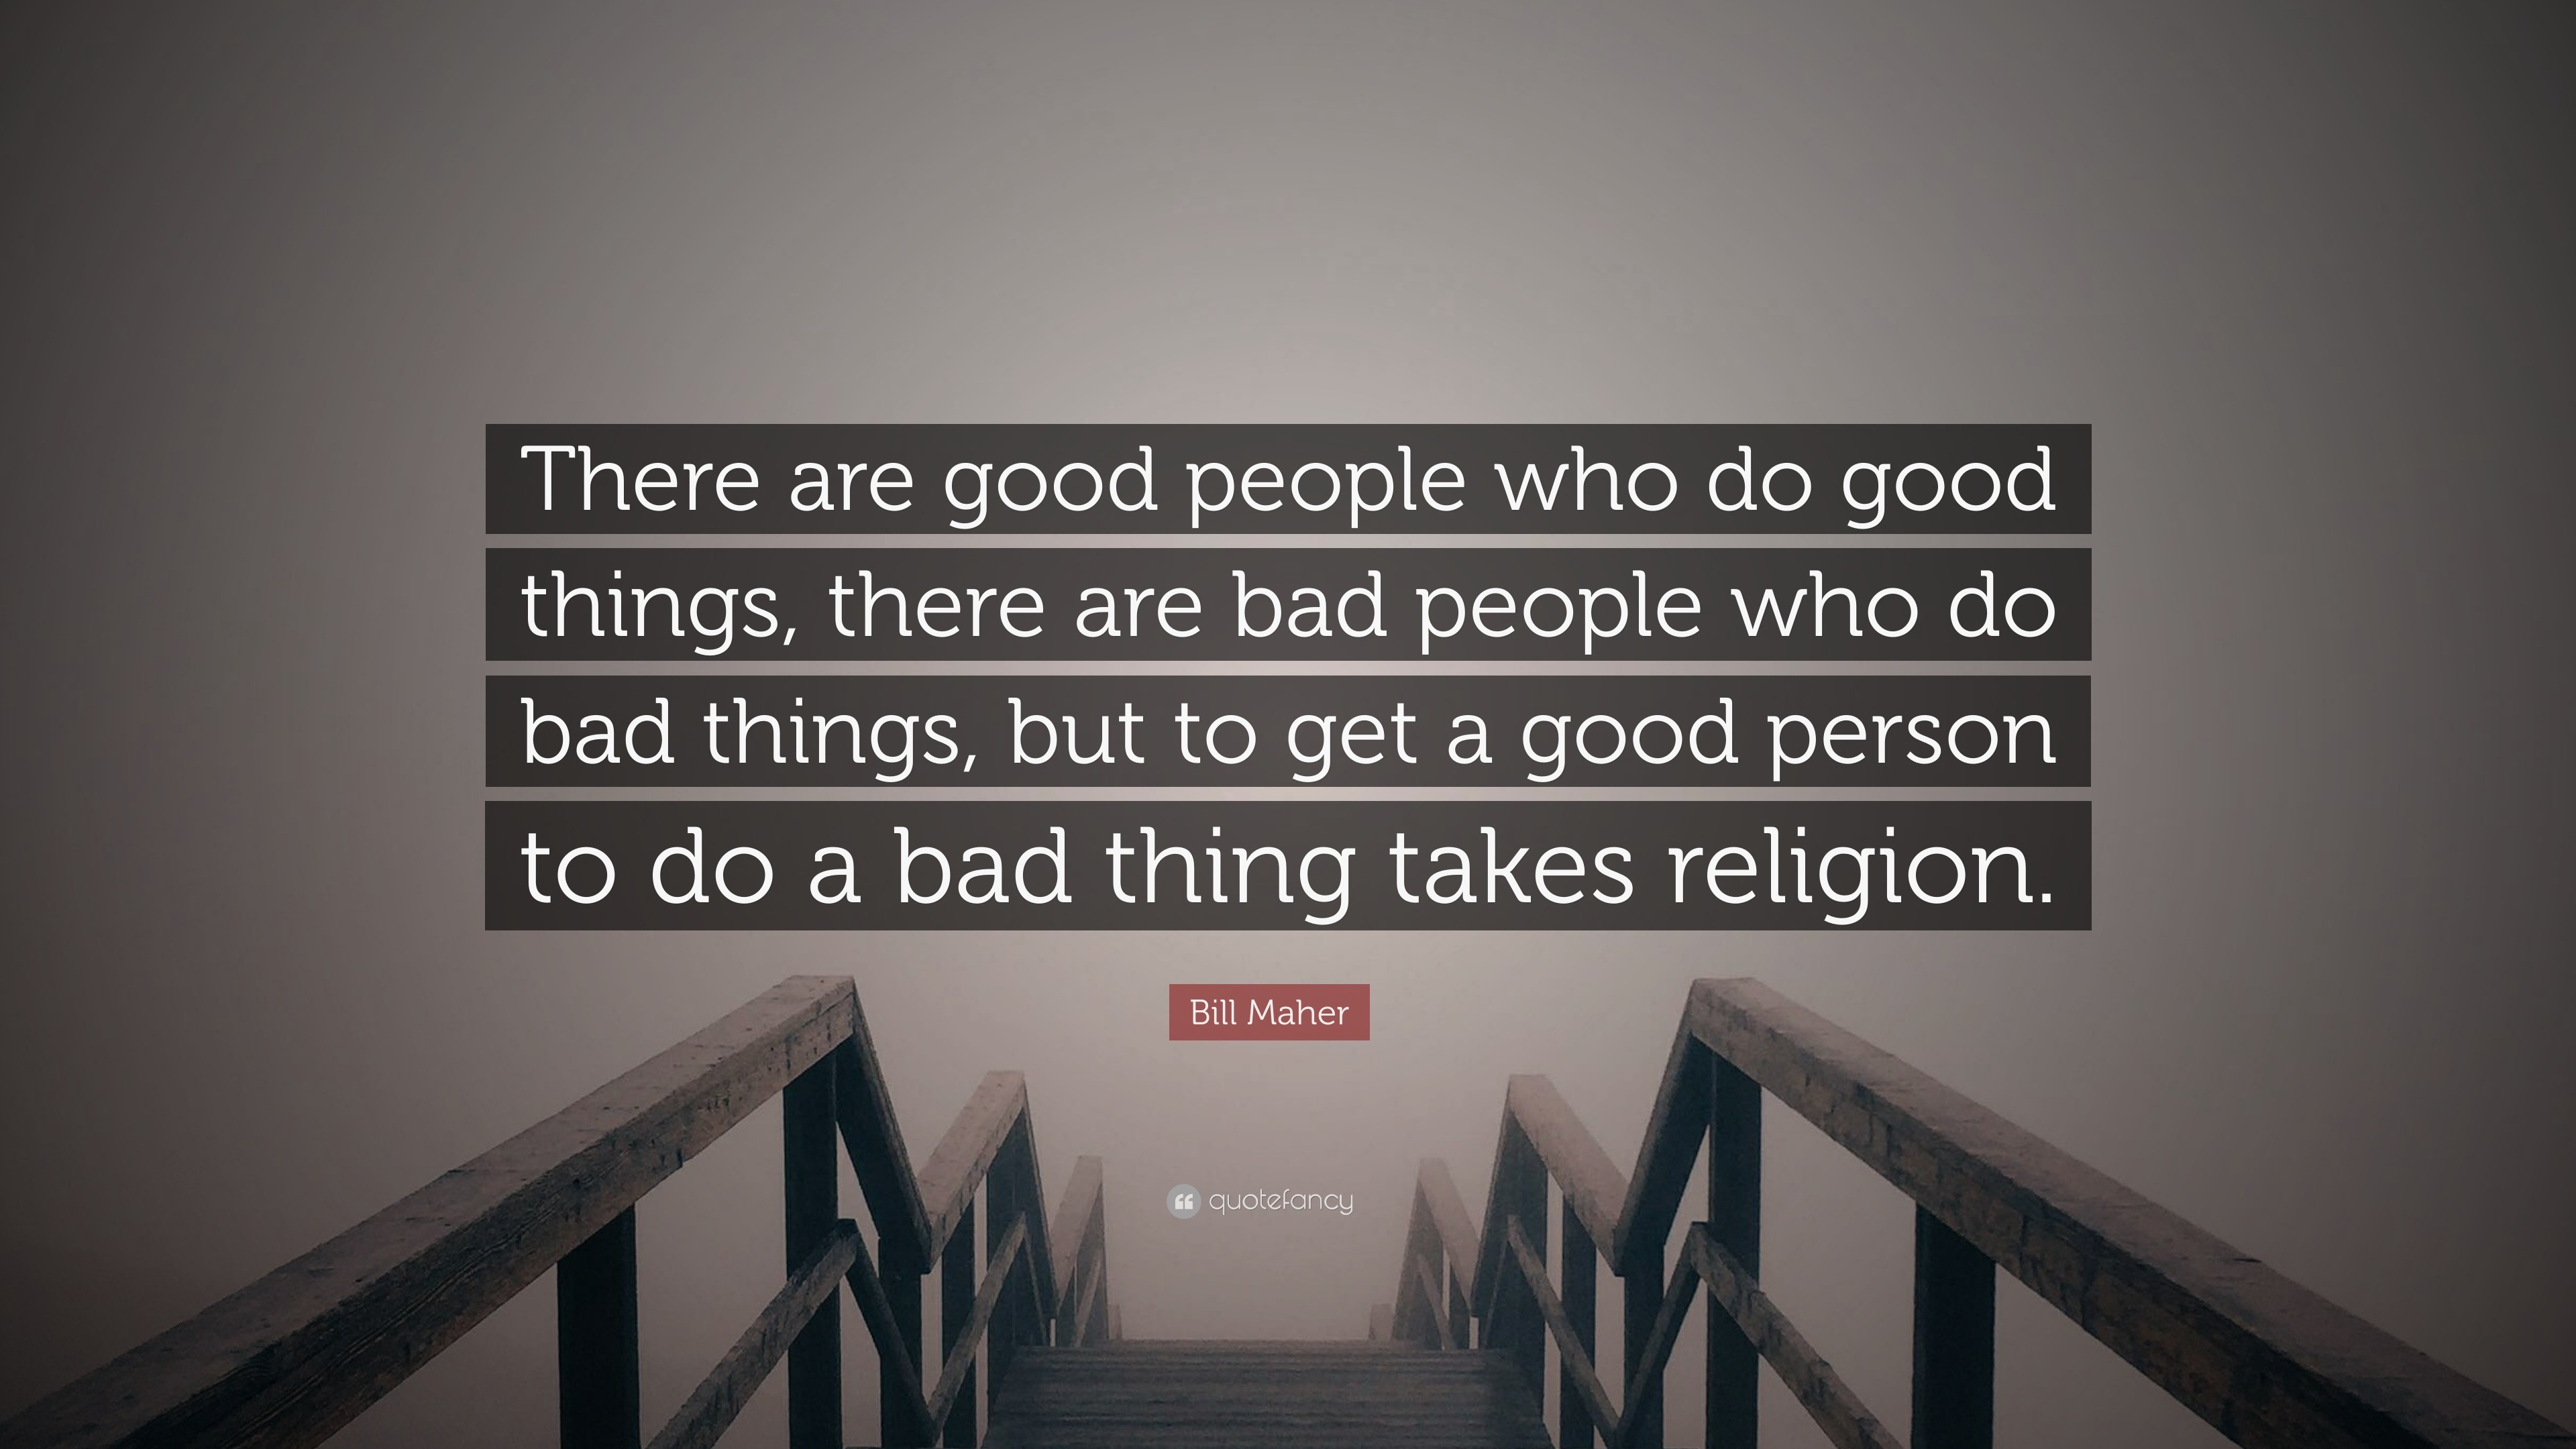 Bill Maher Quote: “There are good